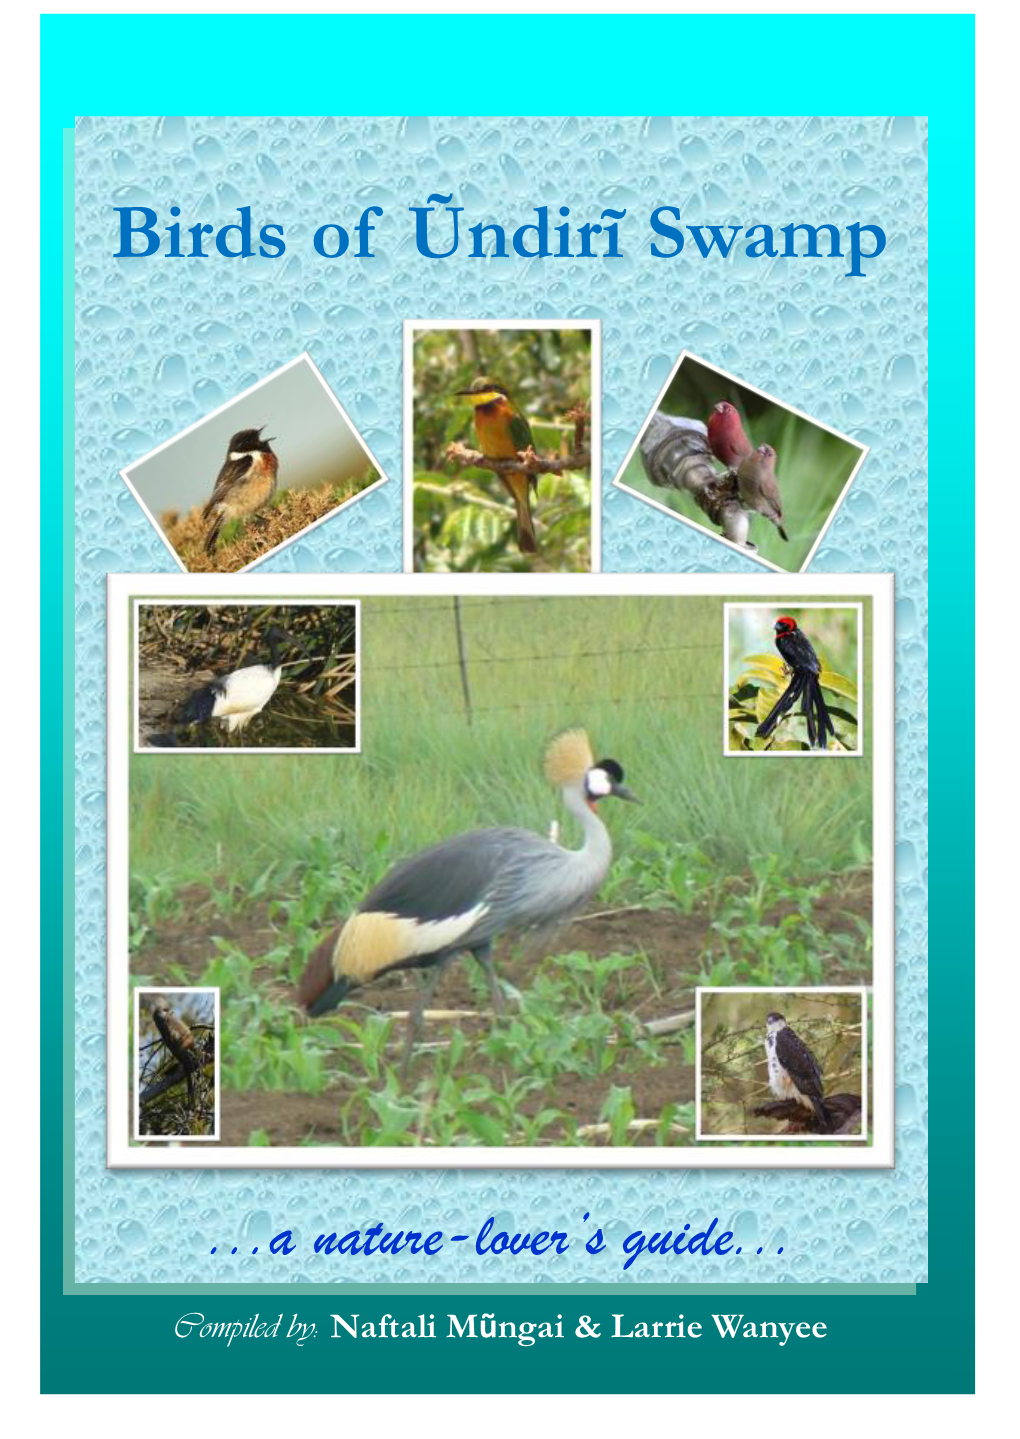 Birds of Ondiri Swamp Is Supported by the Rufford Small Grants Foundation